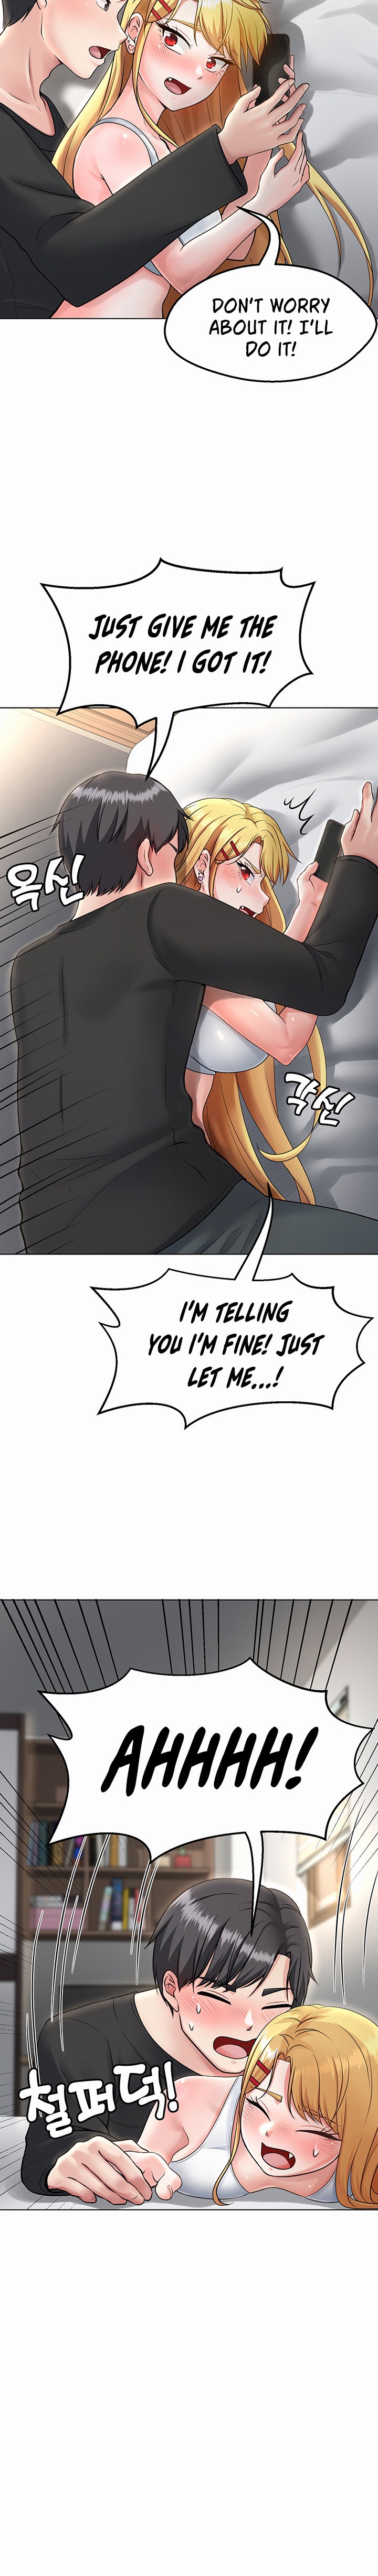 Seoul Kids These Days - Chapter 4 Page 9